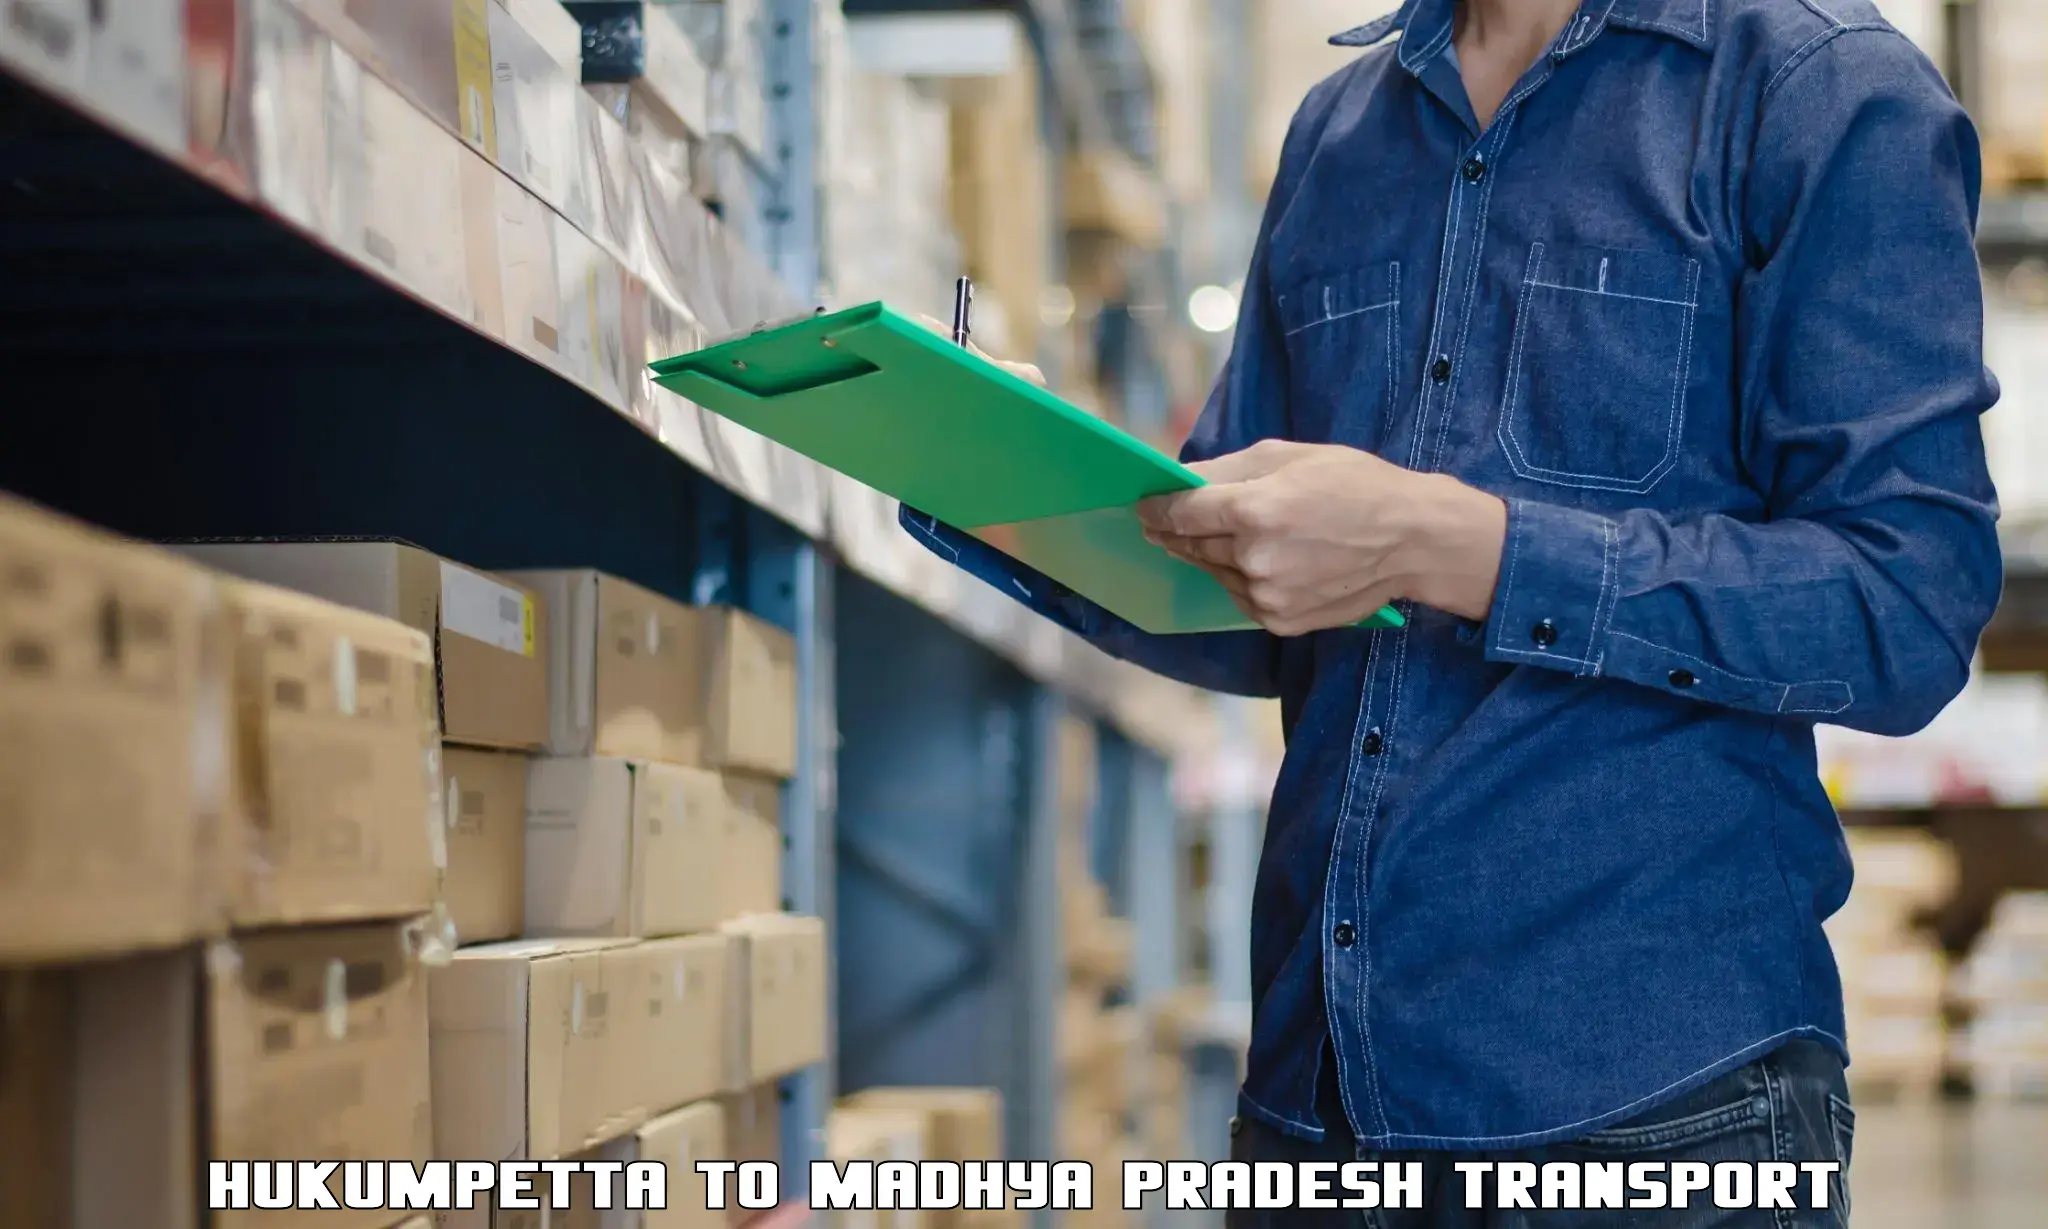 Package delivery services Hukumpetta to Manasa